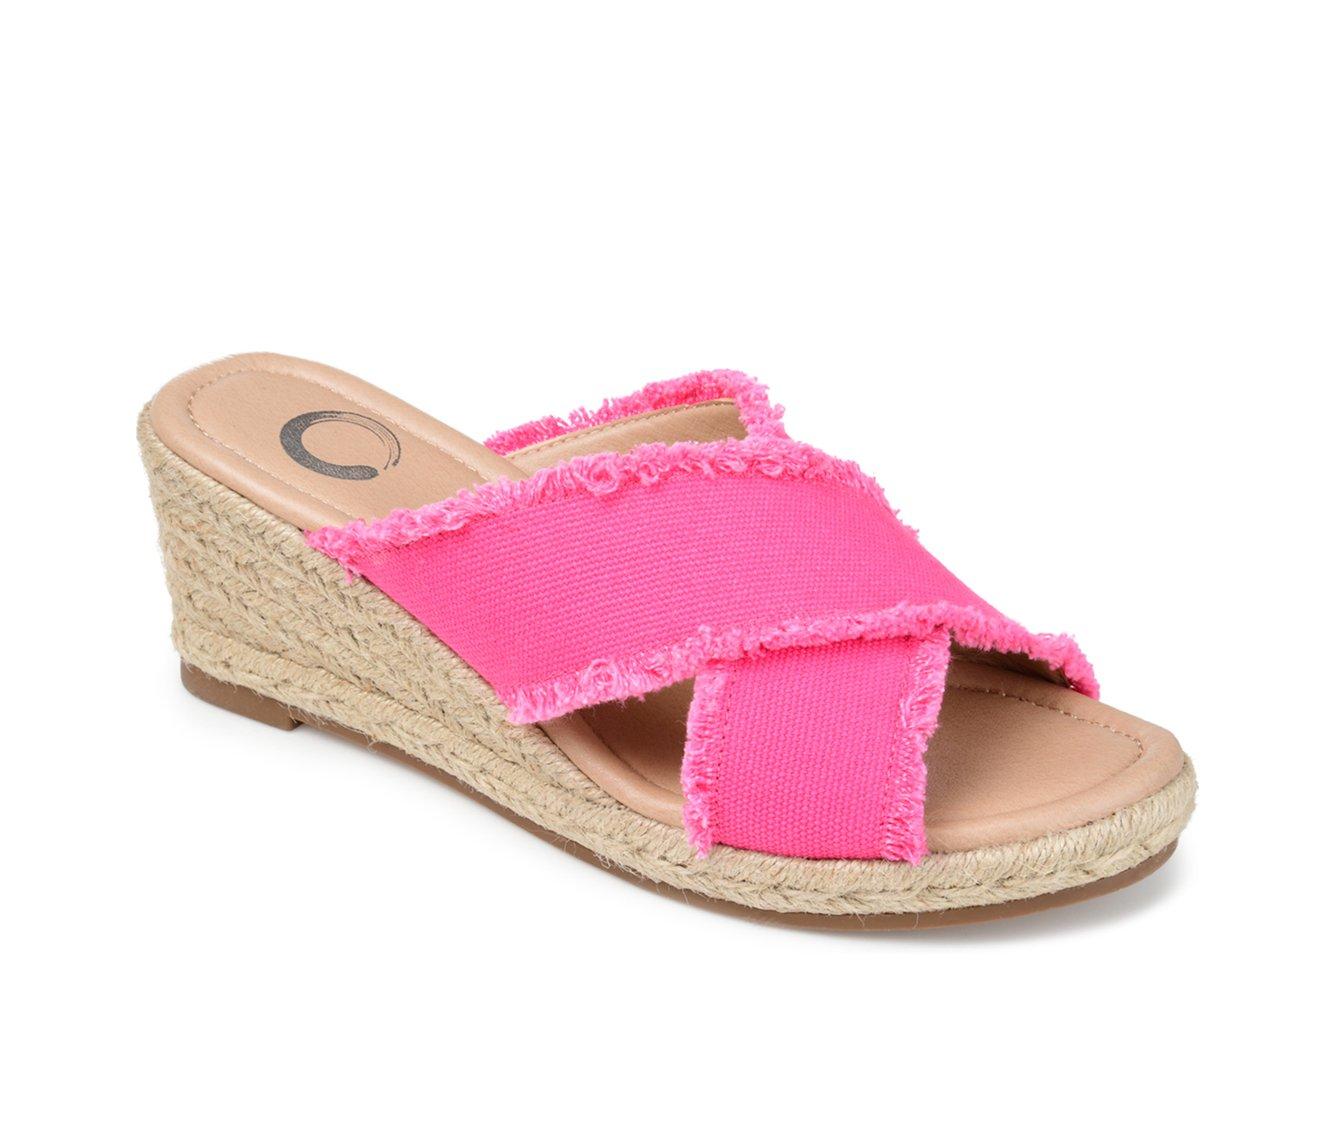 Women's Journee Collection Shanni Wedge Sandals